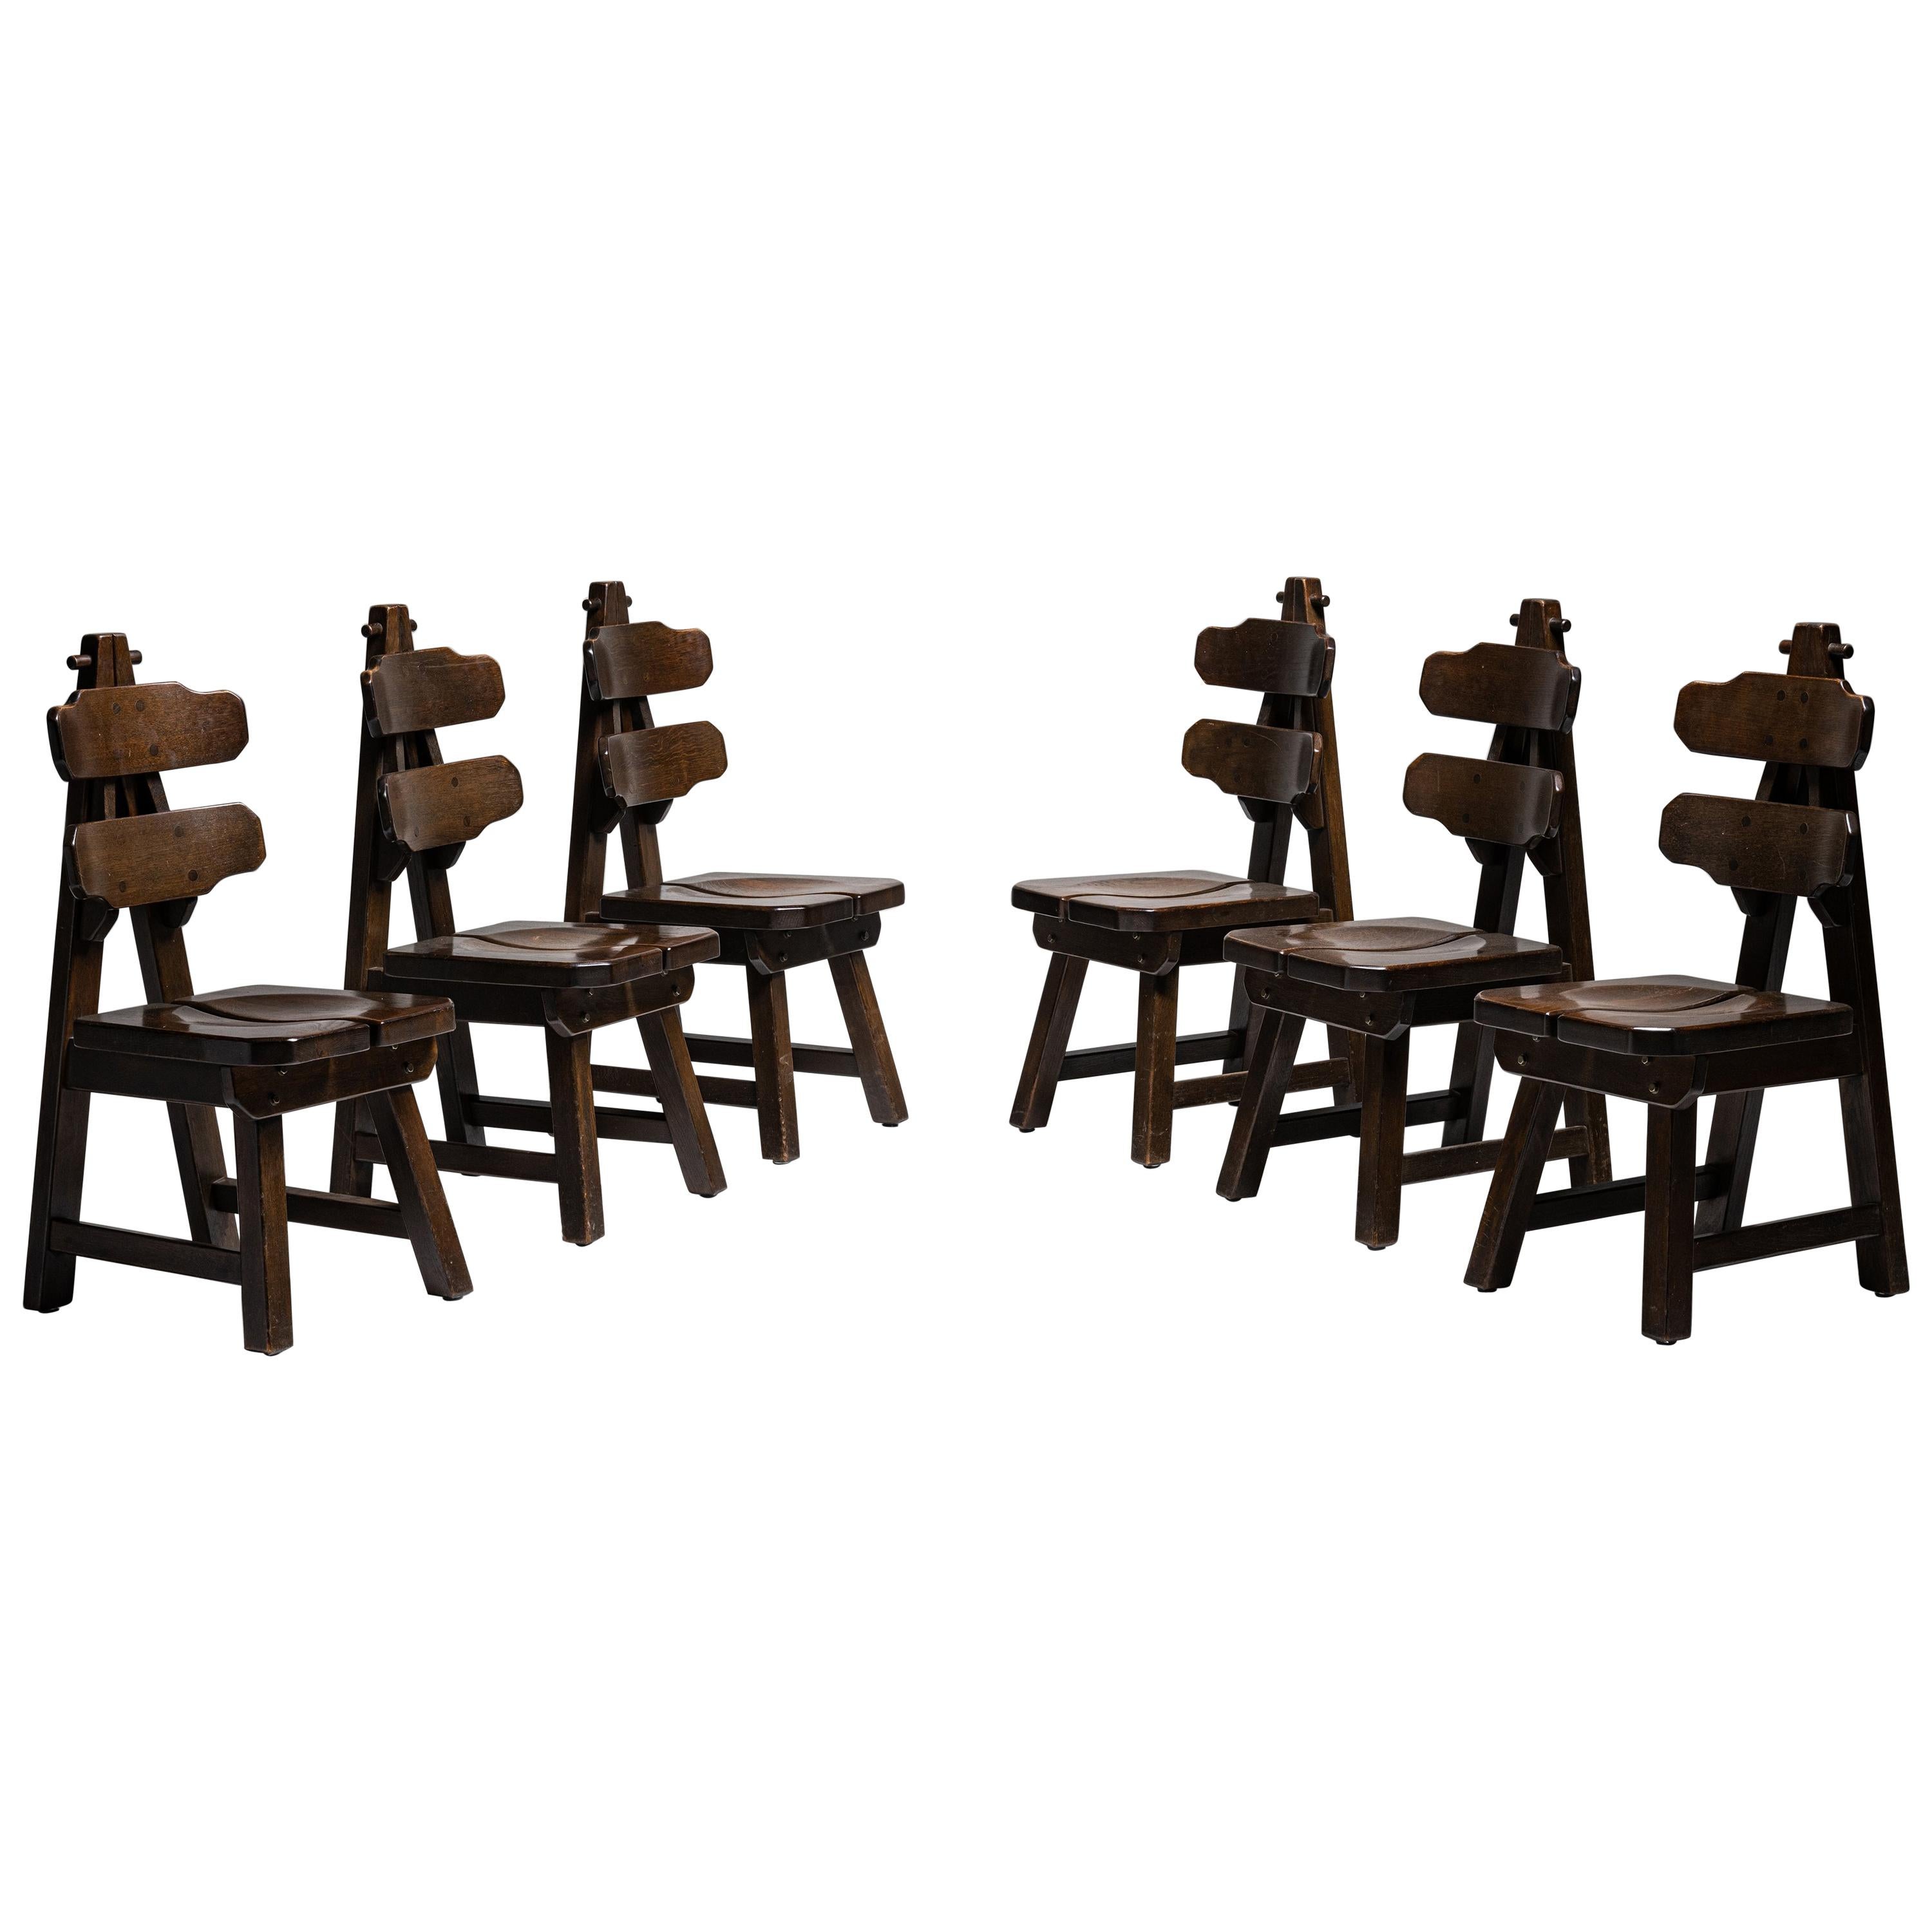 Set of '6' Brutalist Oak Dining Chairs, France, circa 1970